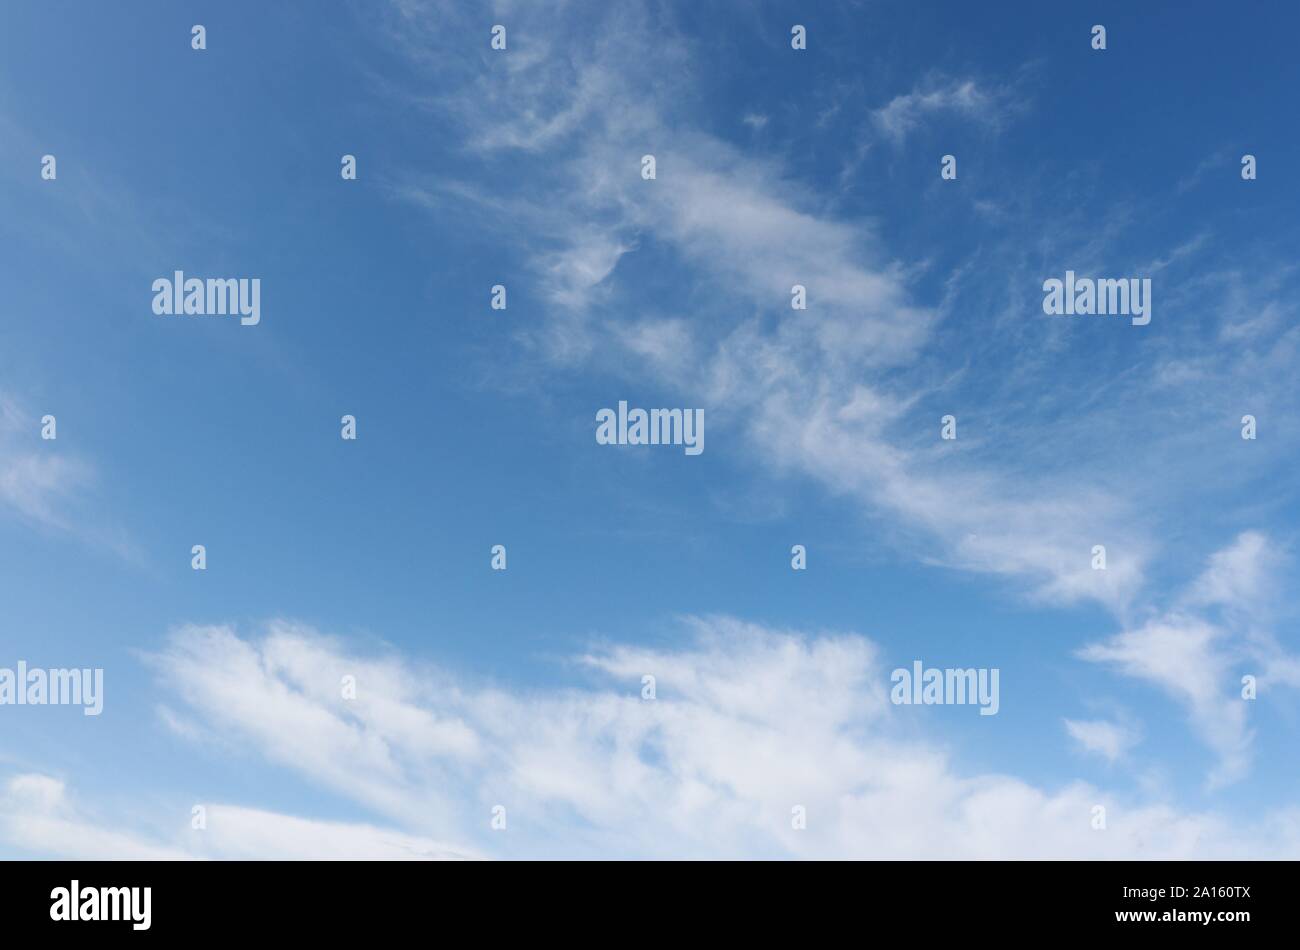 Wispy white cirrus clouds in blue sky Stock Photo